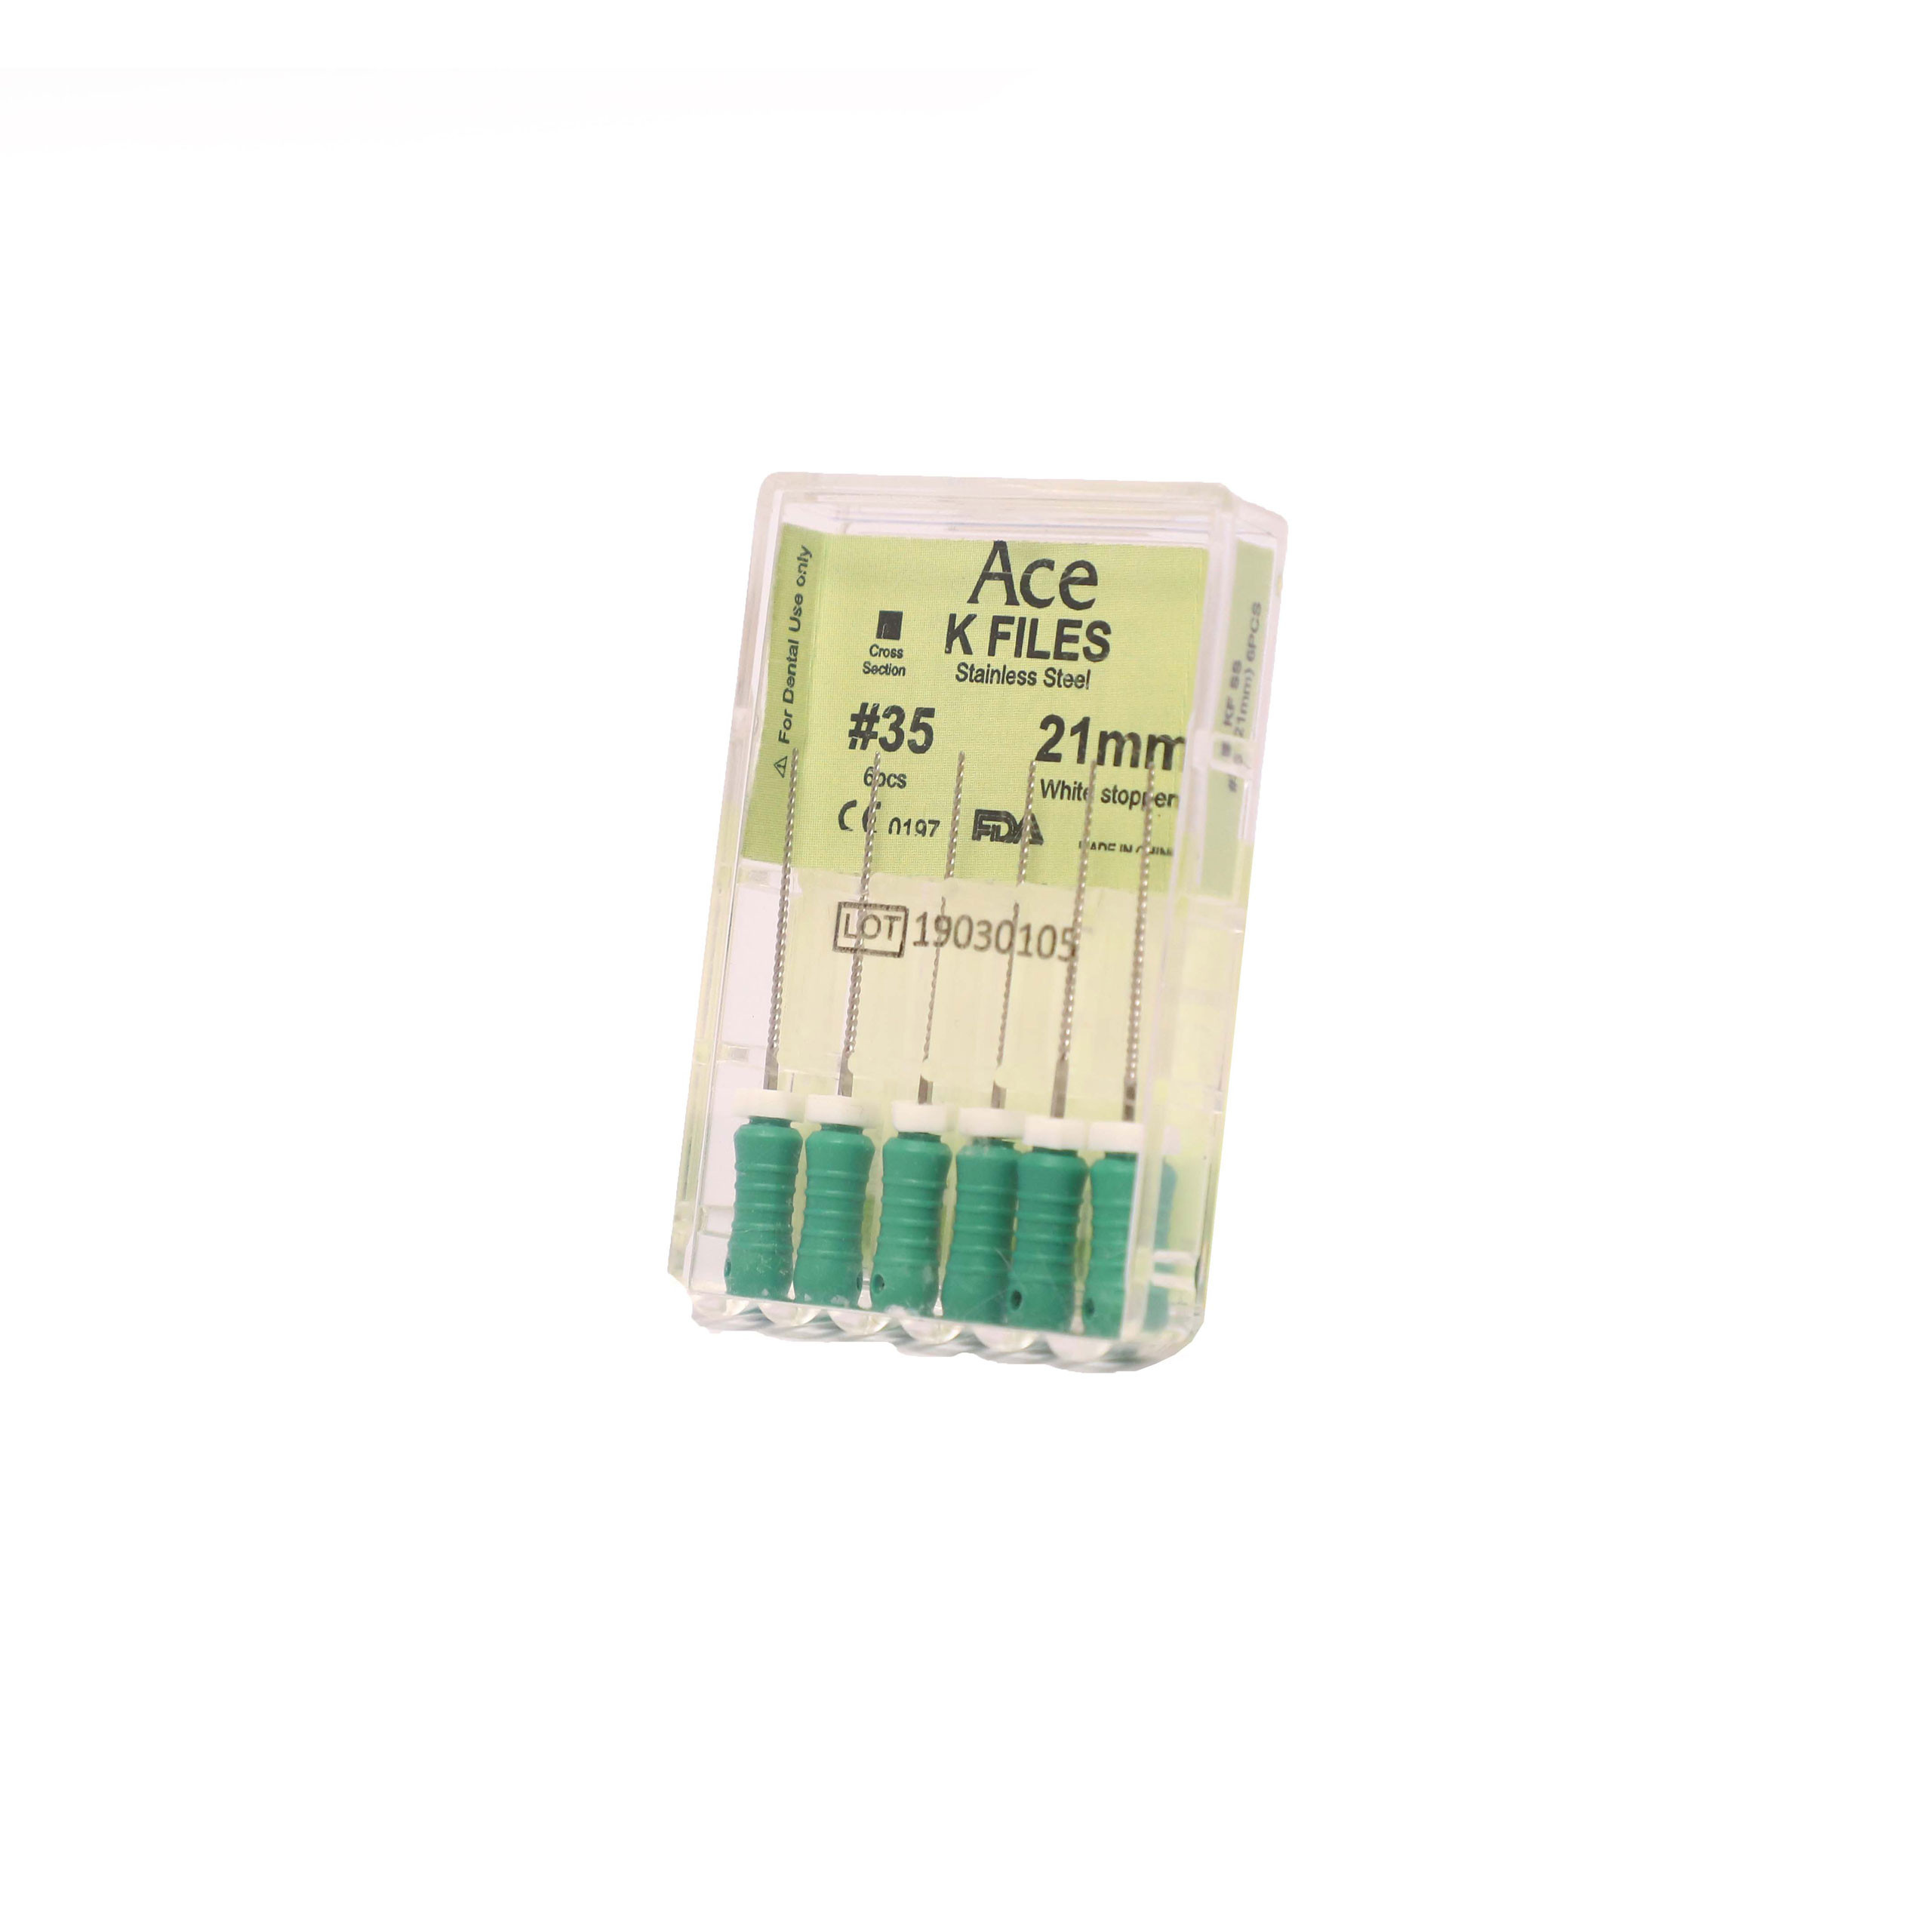 Prime Ace K Files #35, 21mm (Pack Of 5)